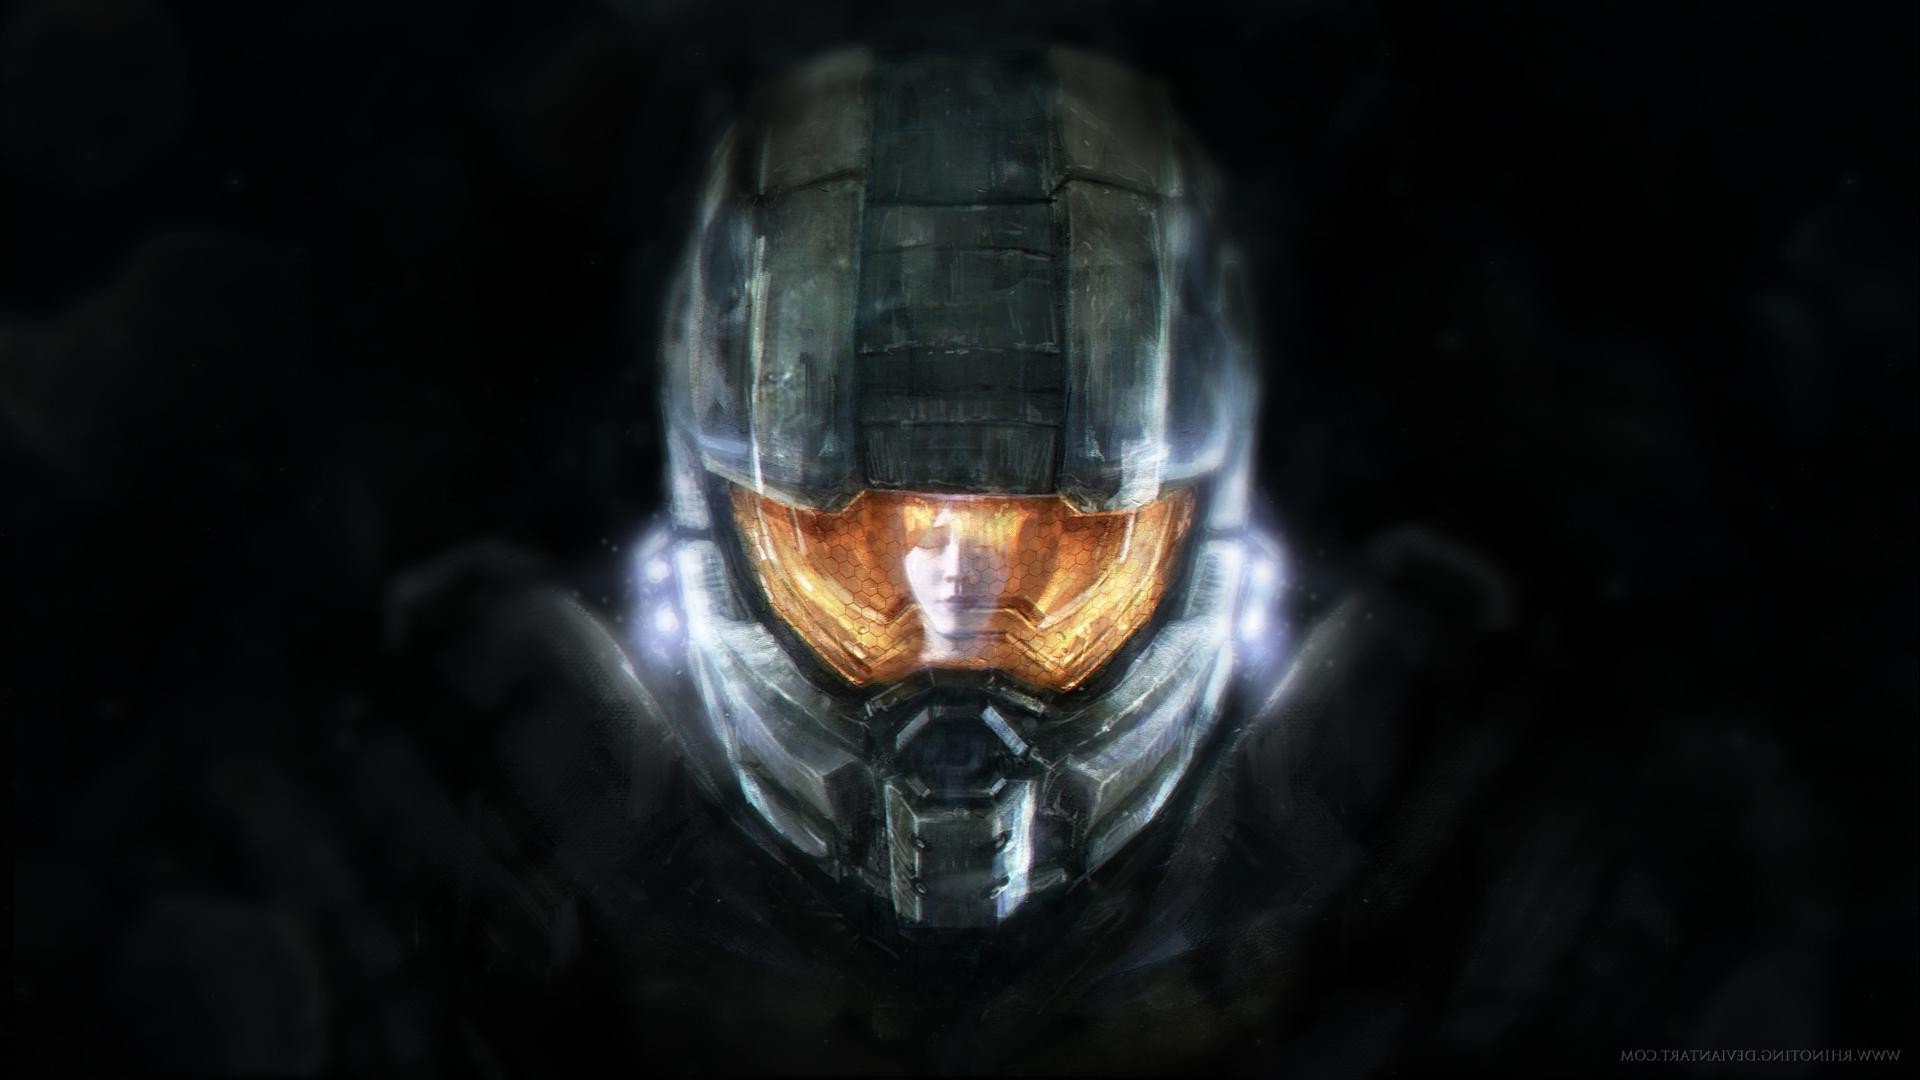 artwork, Halo, Halo 4, Master Chief, Xbox One, 343 Industries, Spartans, Video Games Wallpaper